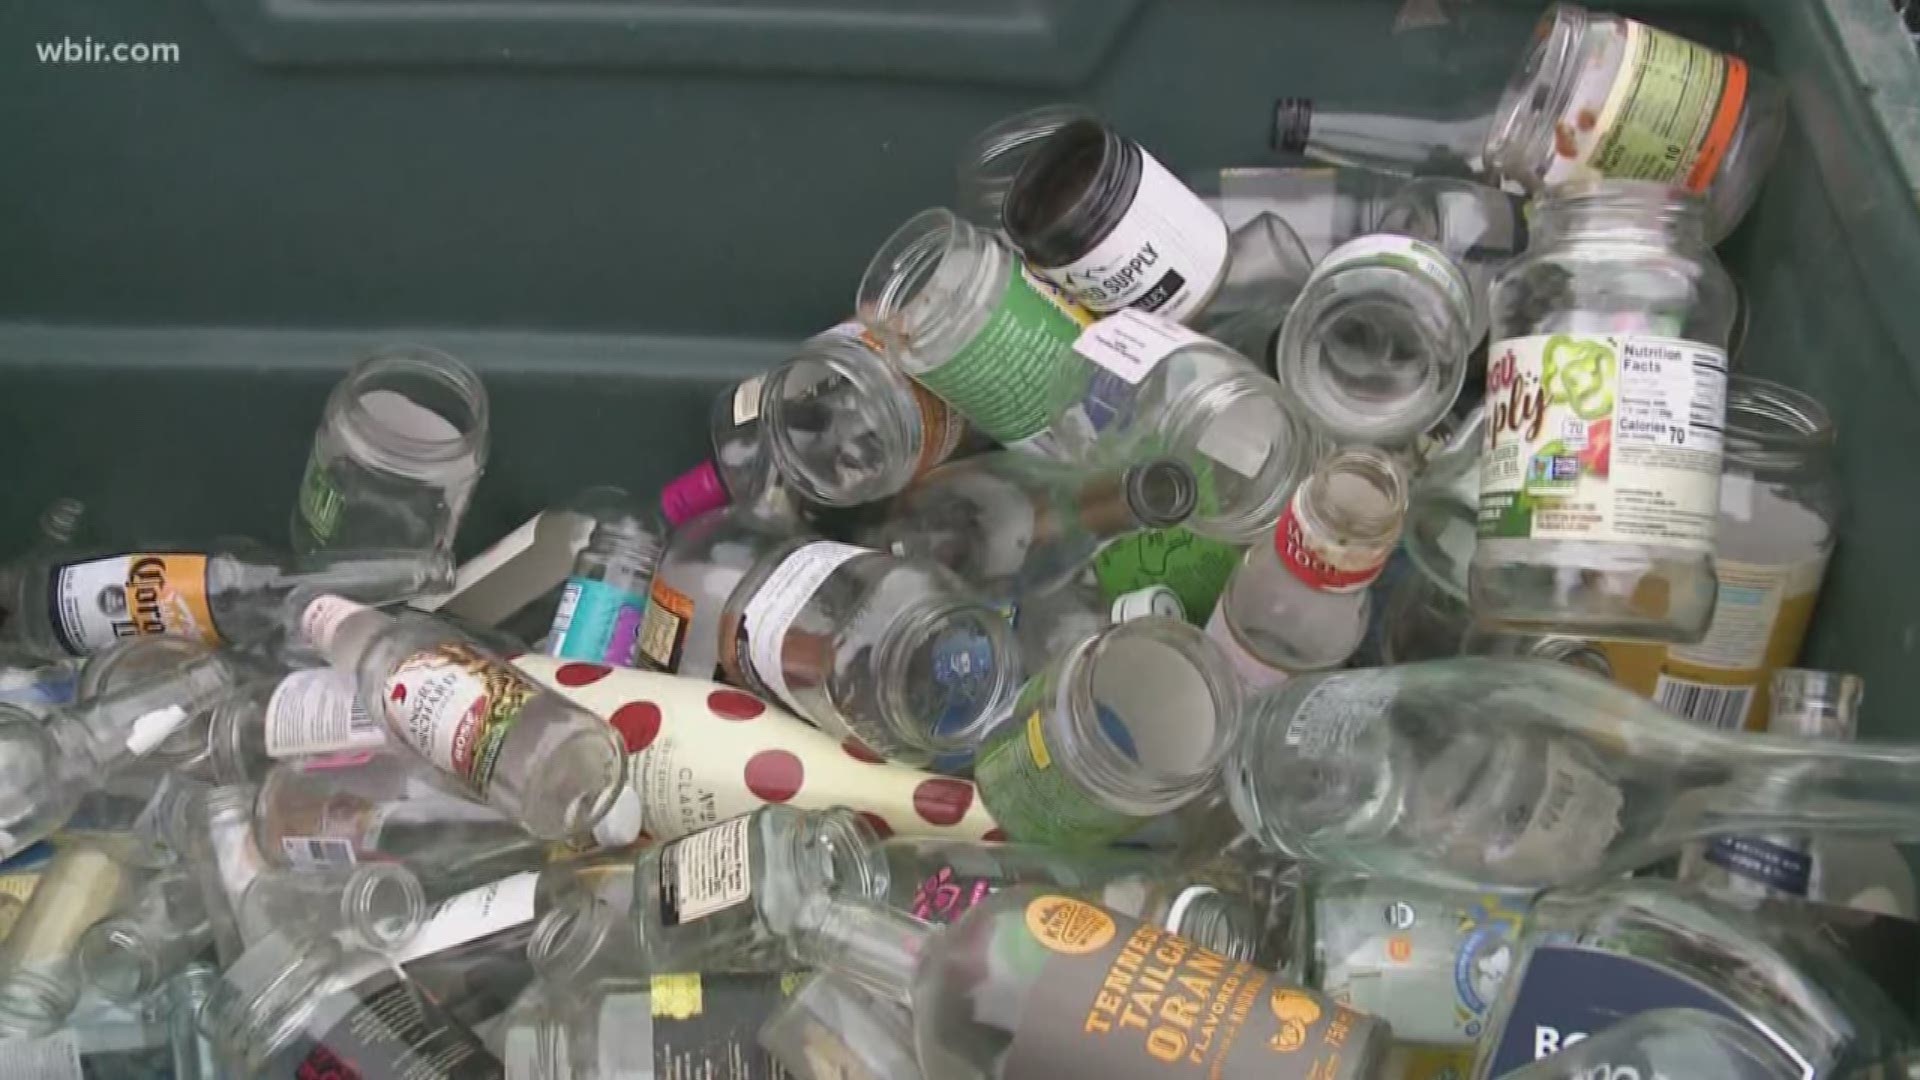 Organizers say putting your glass in the trash can bring serious harm to the environment.